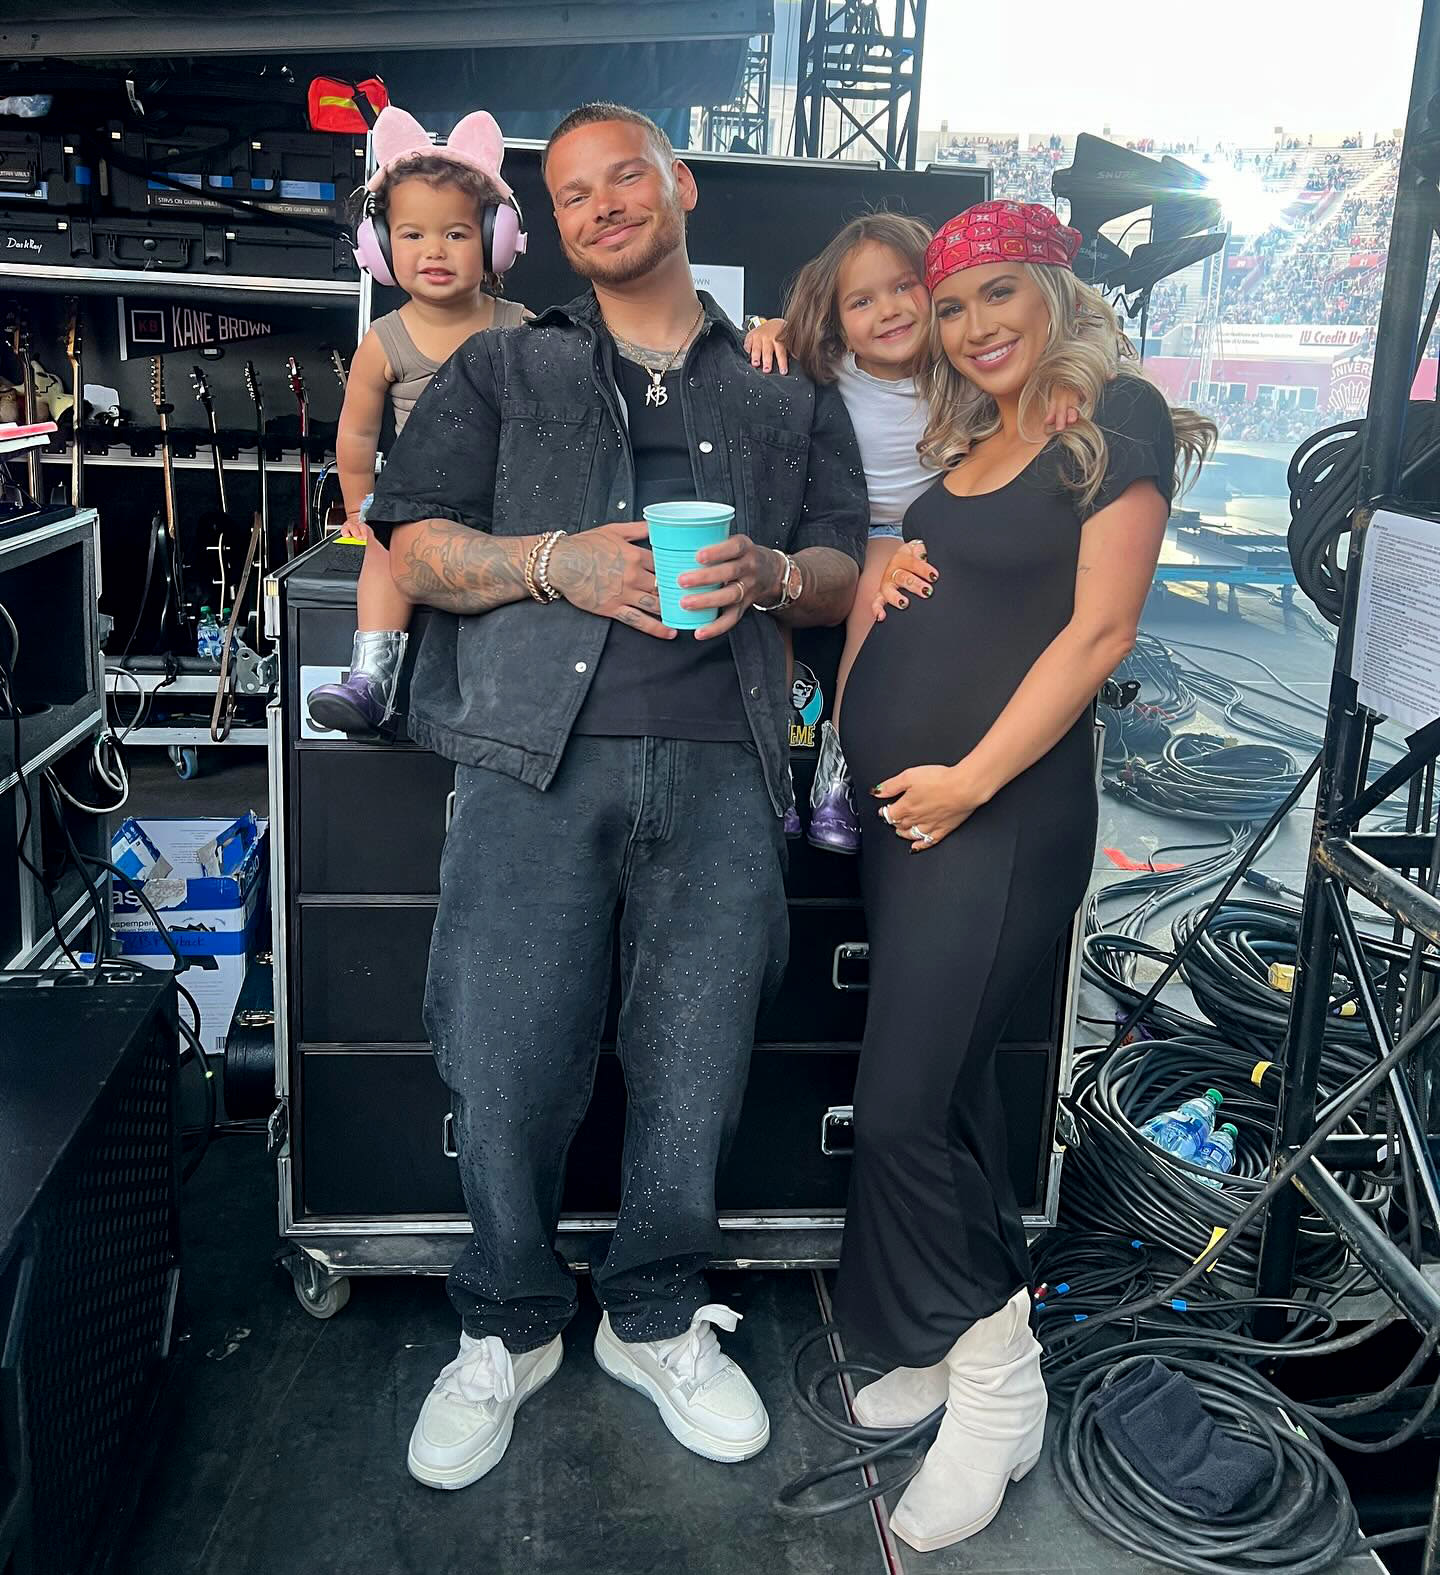 Kane Brown and Wife Katelyn Share the Moment Their Daughters Met New Baby Brother